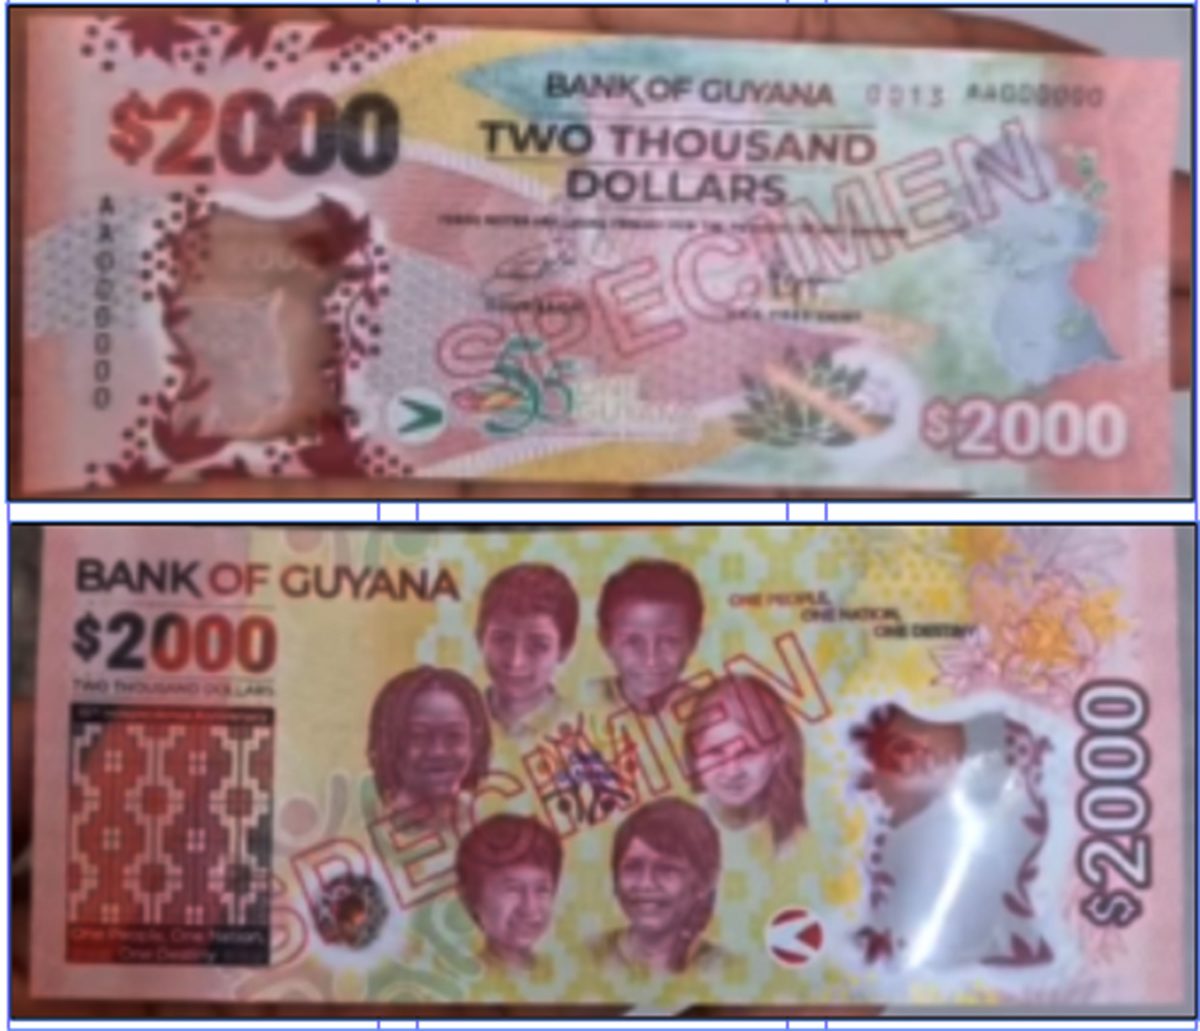 Specimens of the special $2,000 note
